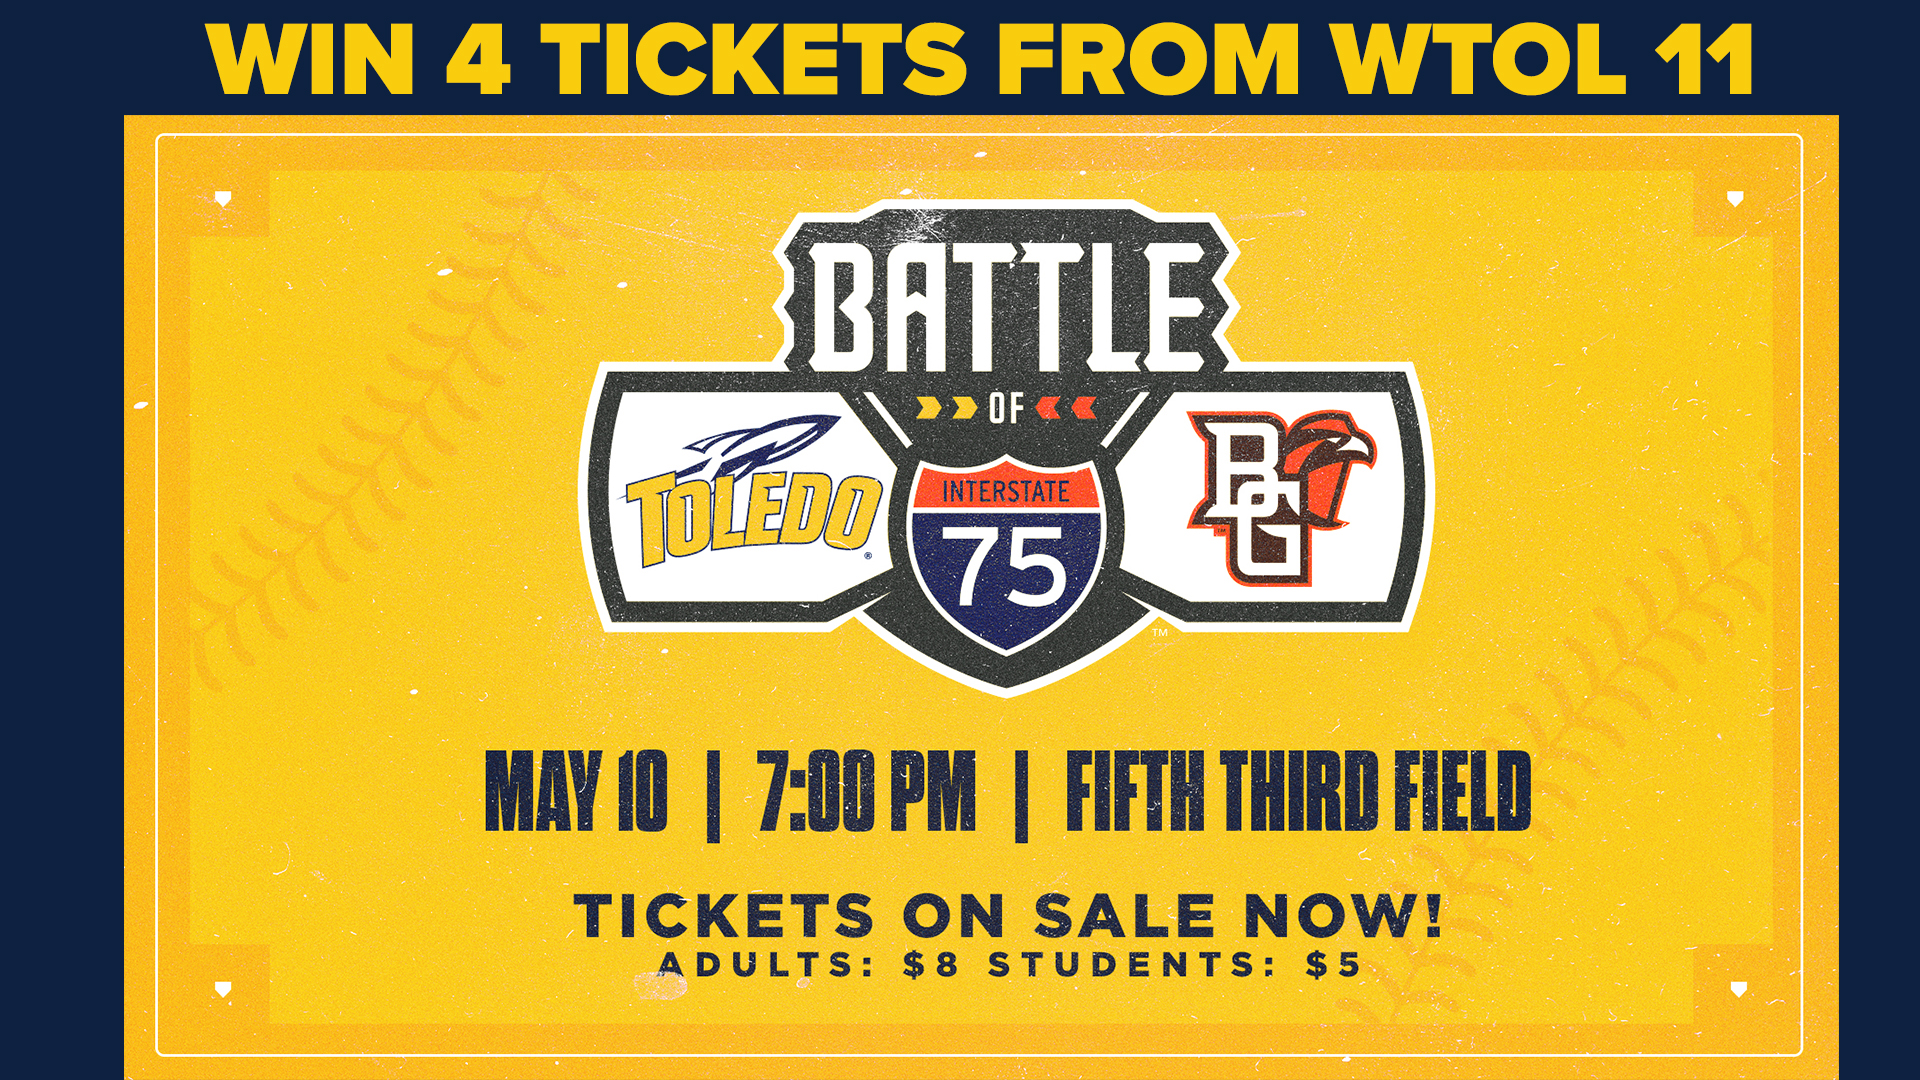 Win 4 tickets to the Battle of I-75